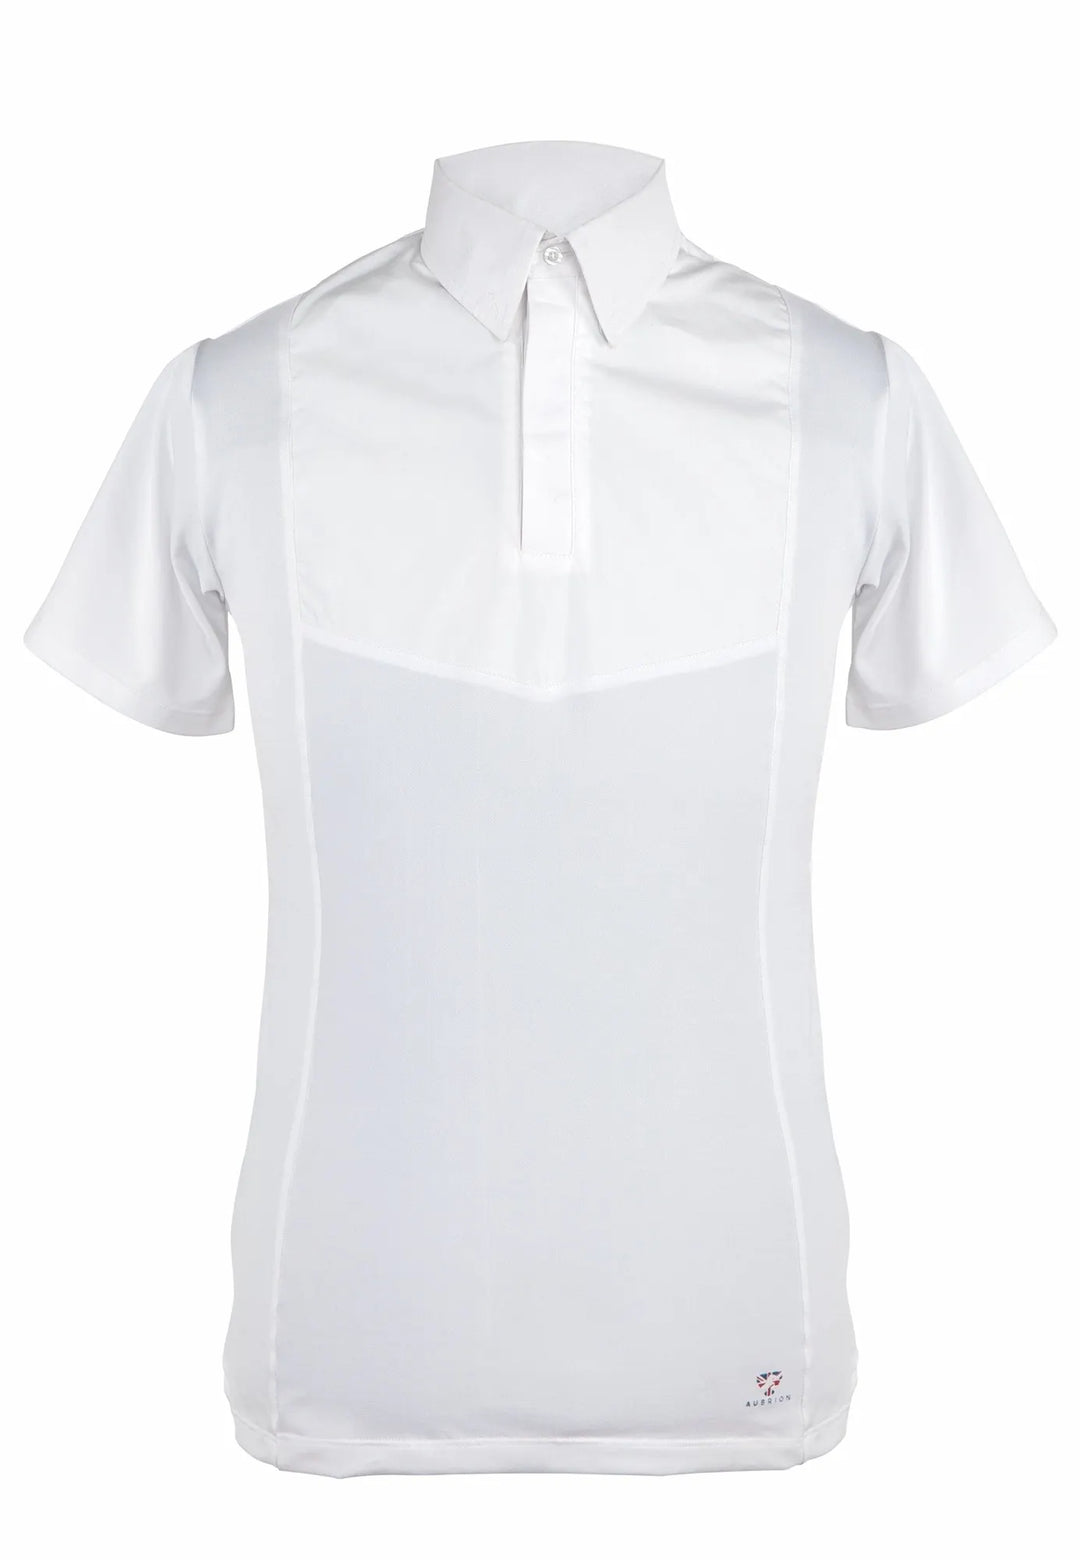 The Aubrion Mens Short Sleeve Tie Shirt in White#White